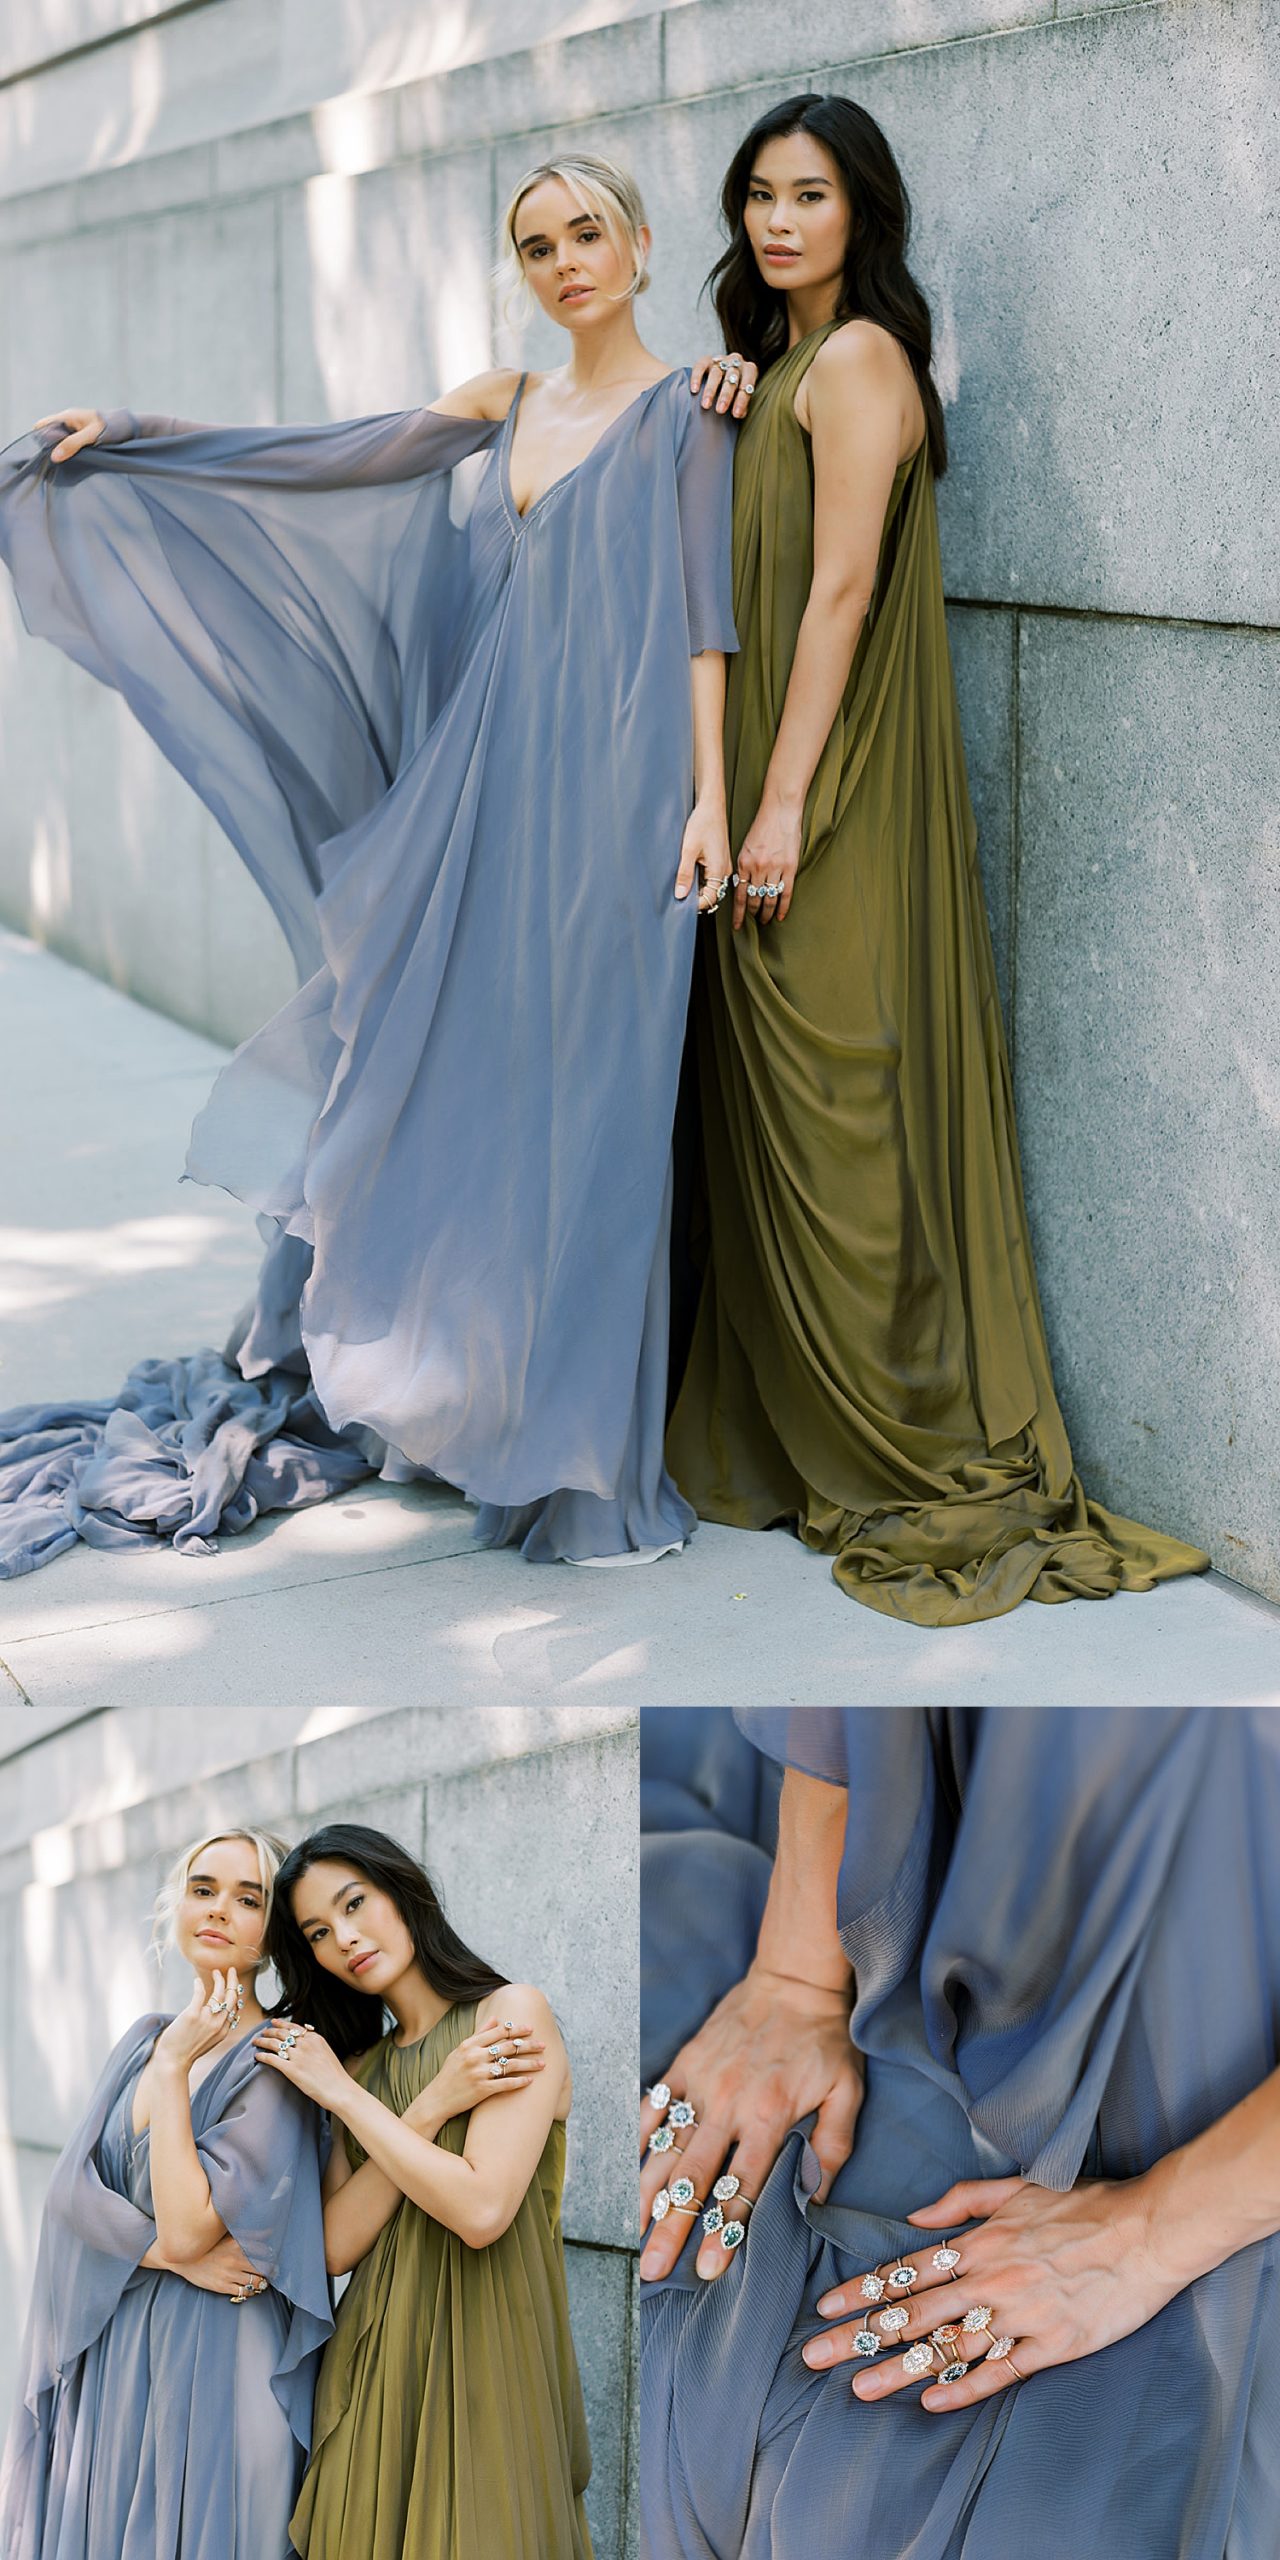 two models for Kristin coffin jewelry in long romantic dresses for editorial campaign 